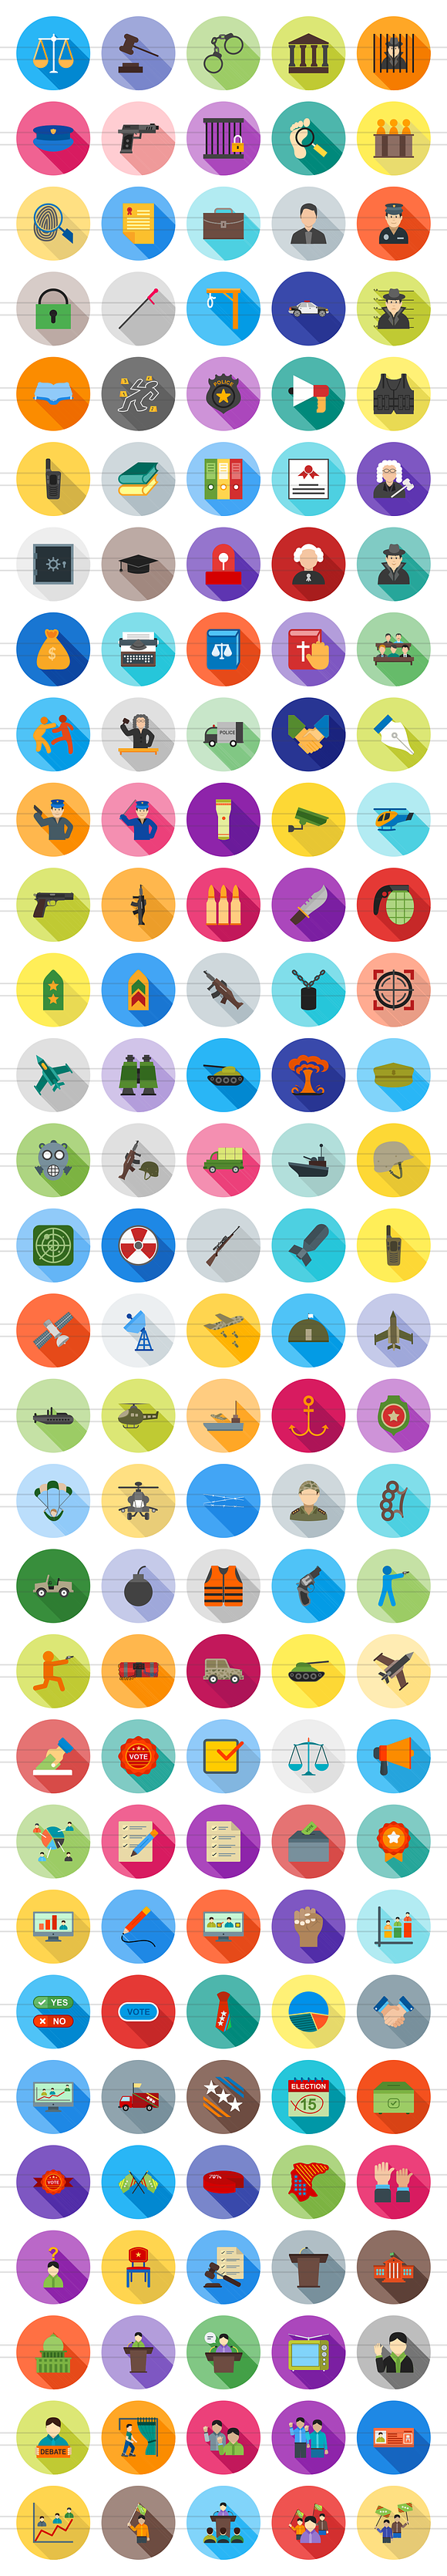 150 Law & Order Flat Icons in Graphics - product preview 1